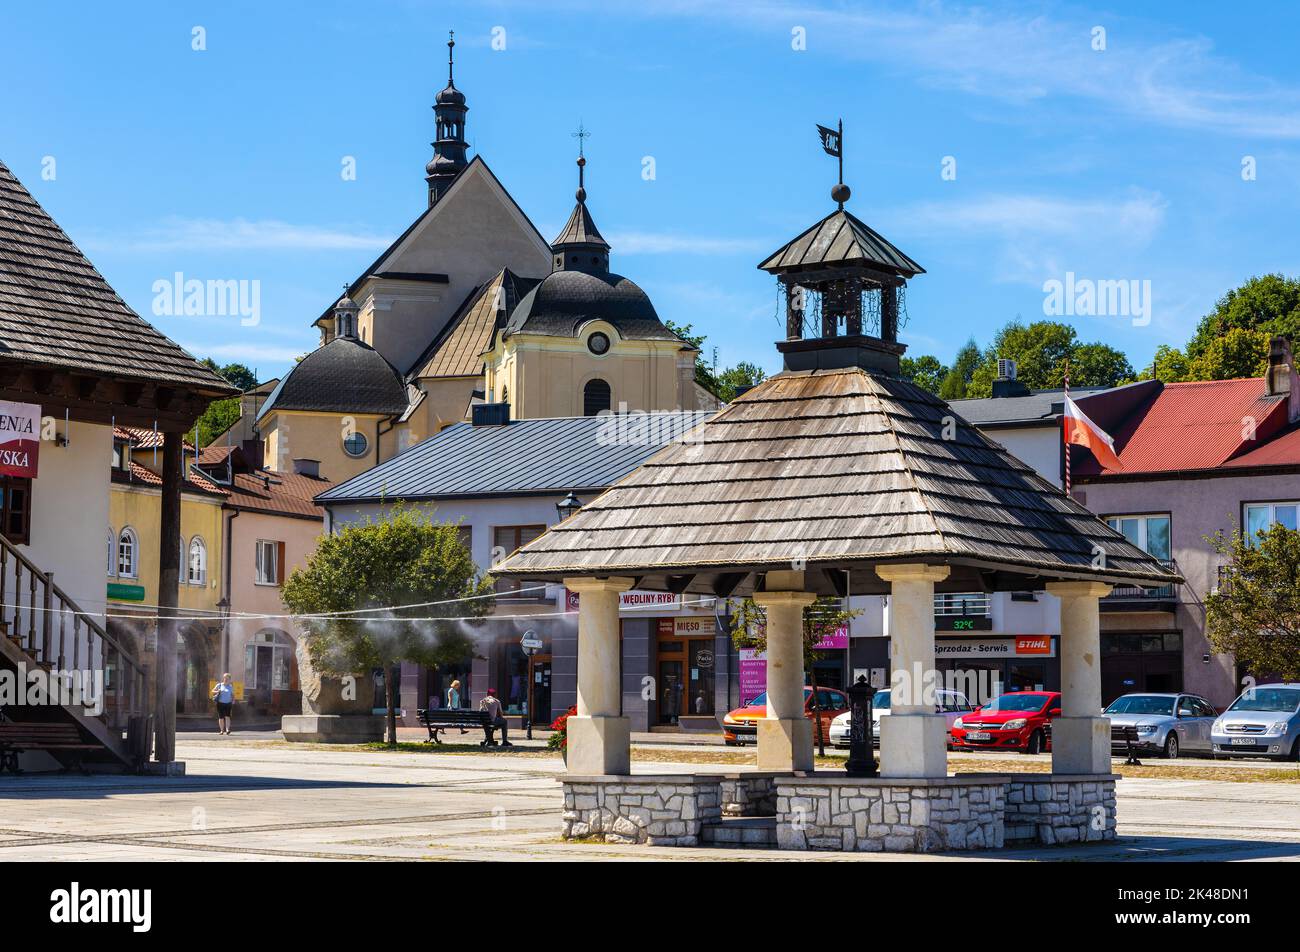 Pilica, Poland - July 25, 2022: Historic renewed wooden well aside Town Hall Ratusz Miejski at Rynek Main Market square in old town quarter of Pilica Stock Photo